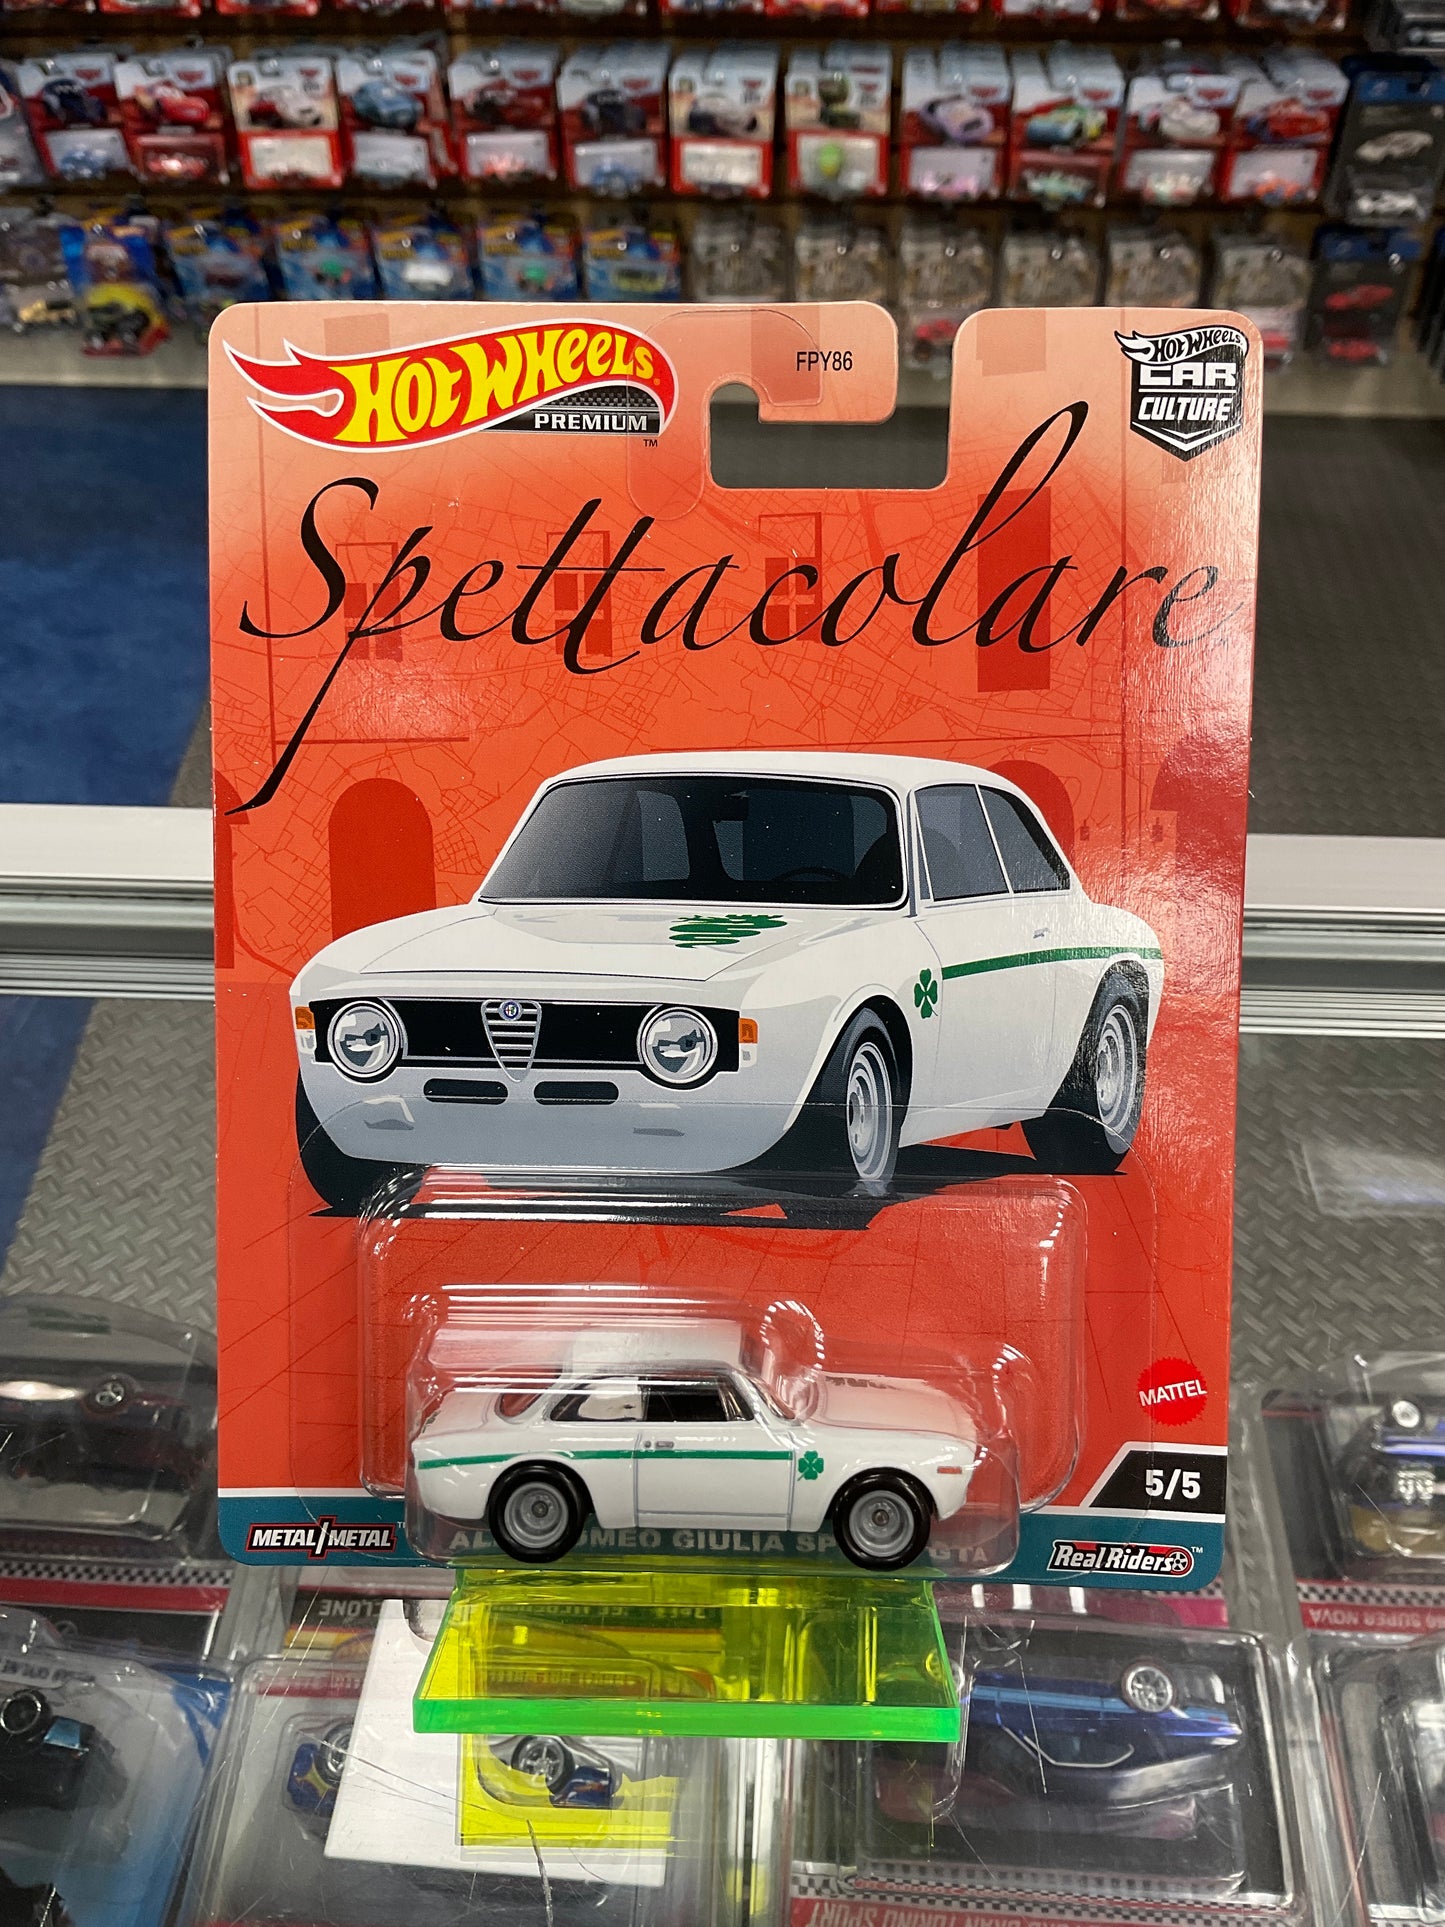 Hot wheels Spettacolare set with Chase